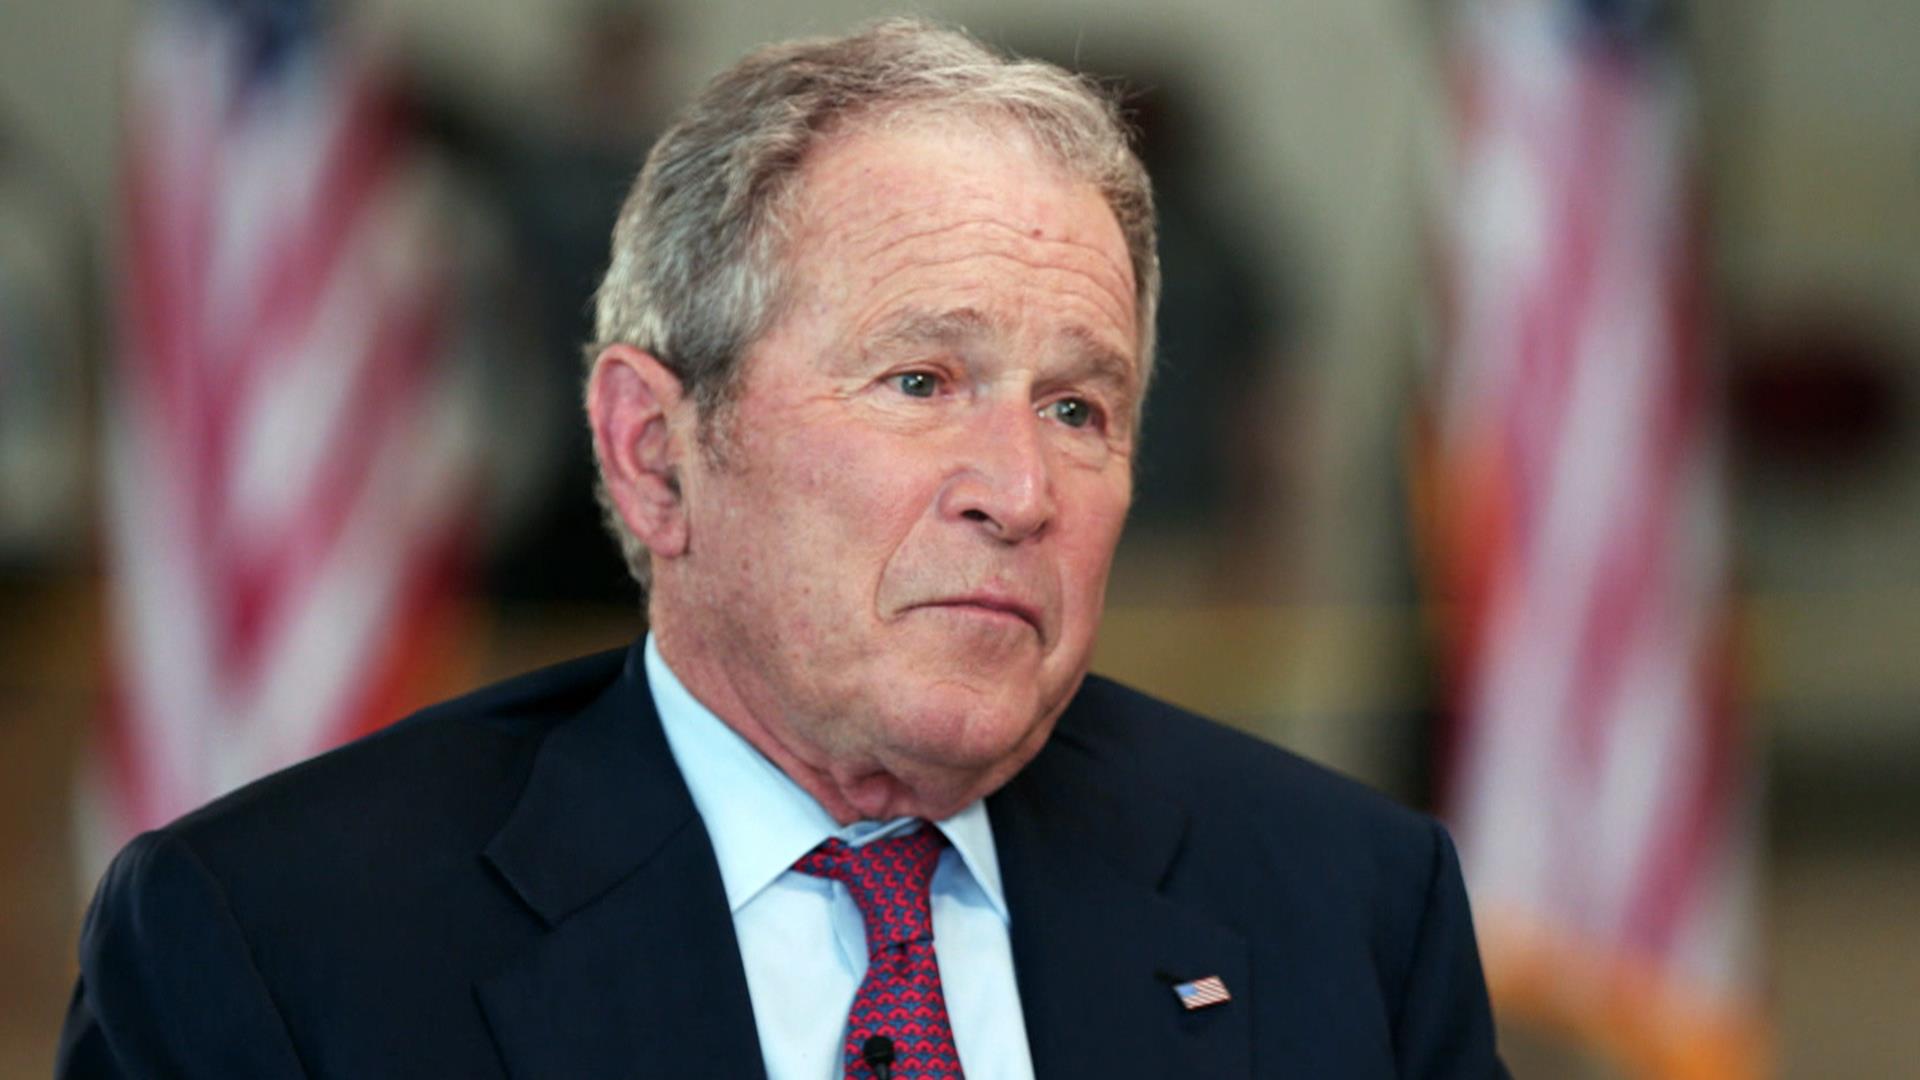 George W. Bush: 'It was the right decision' to go into Afghanistan and Iraq